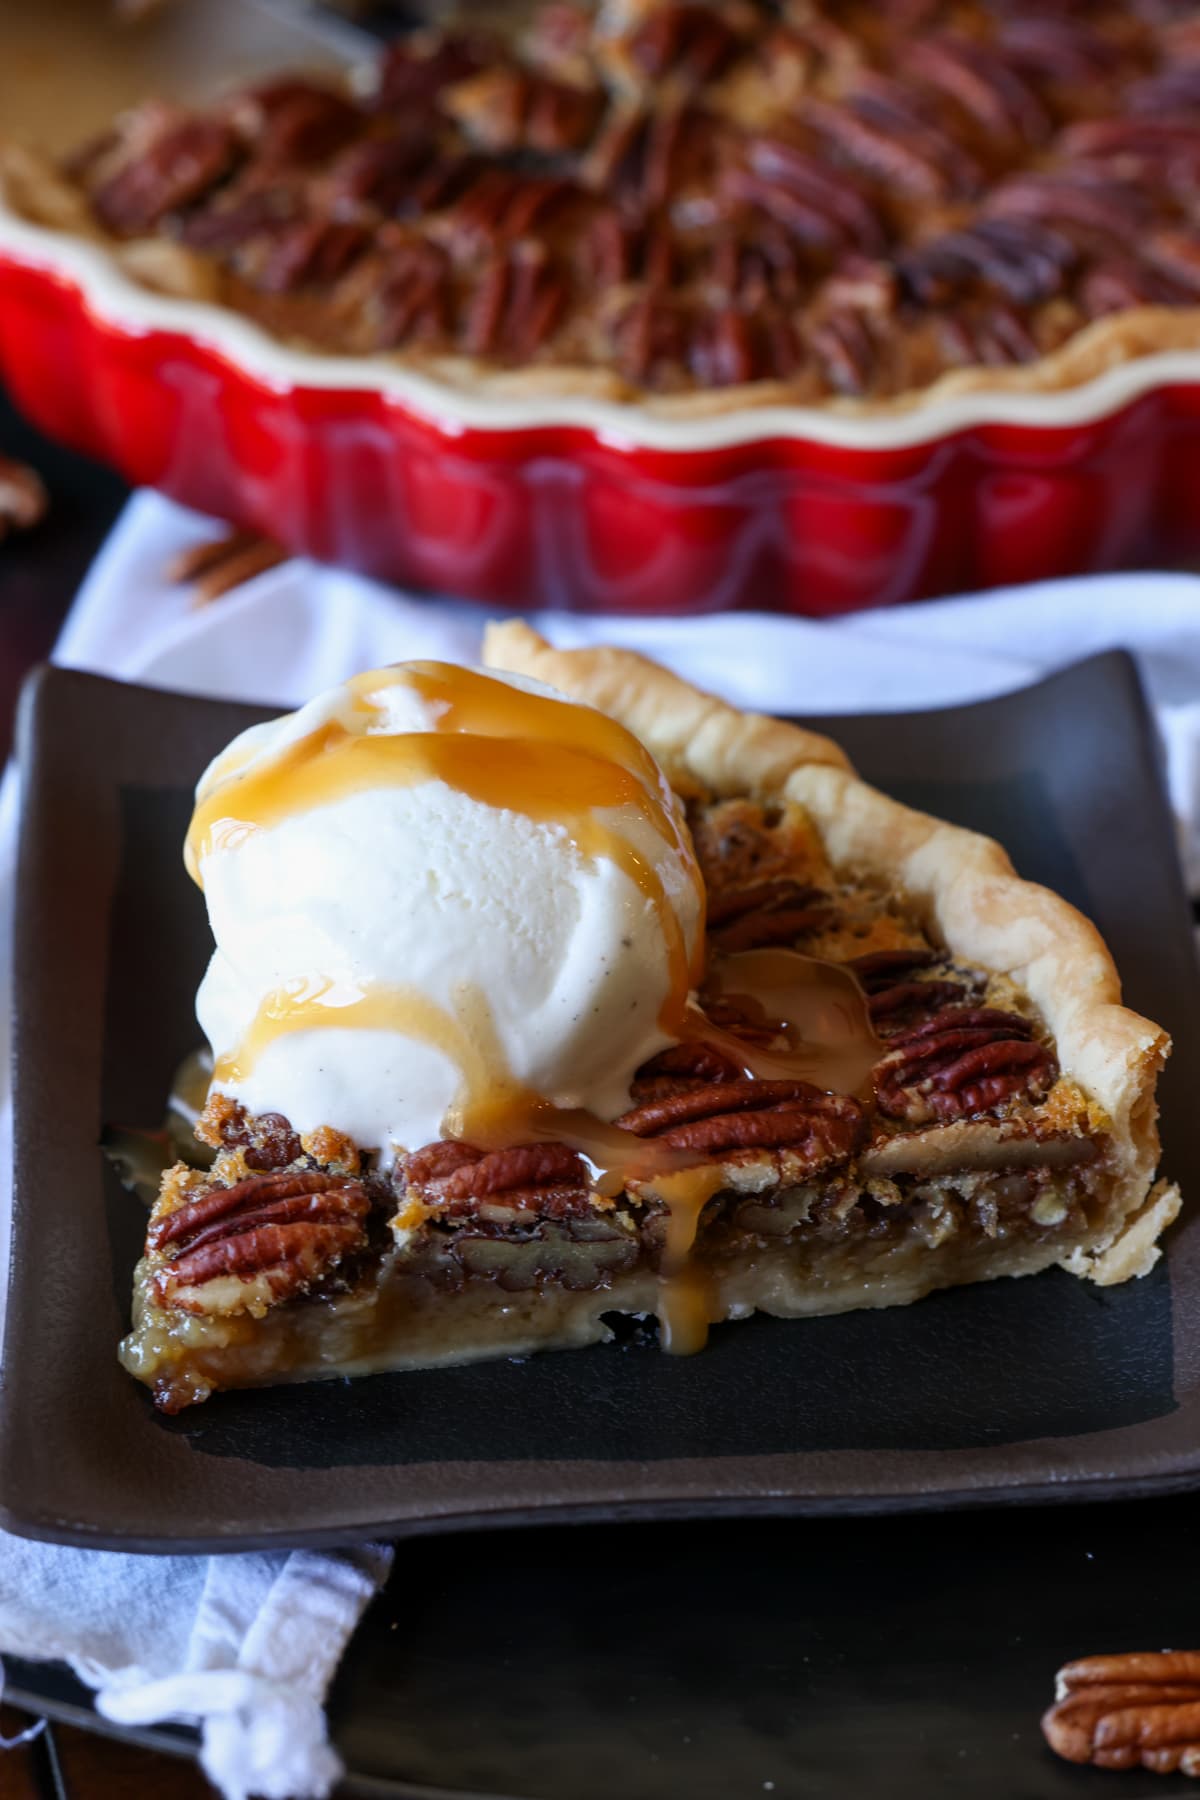 A slice of pecan tart with a scoop of vanilla ice cream and caramel sauce